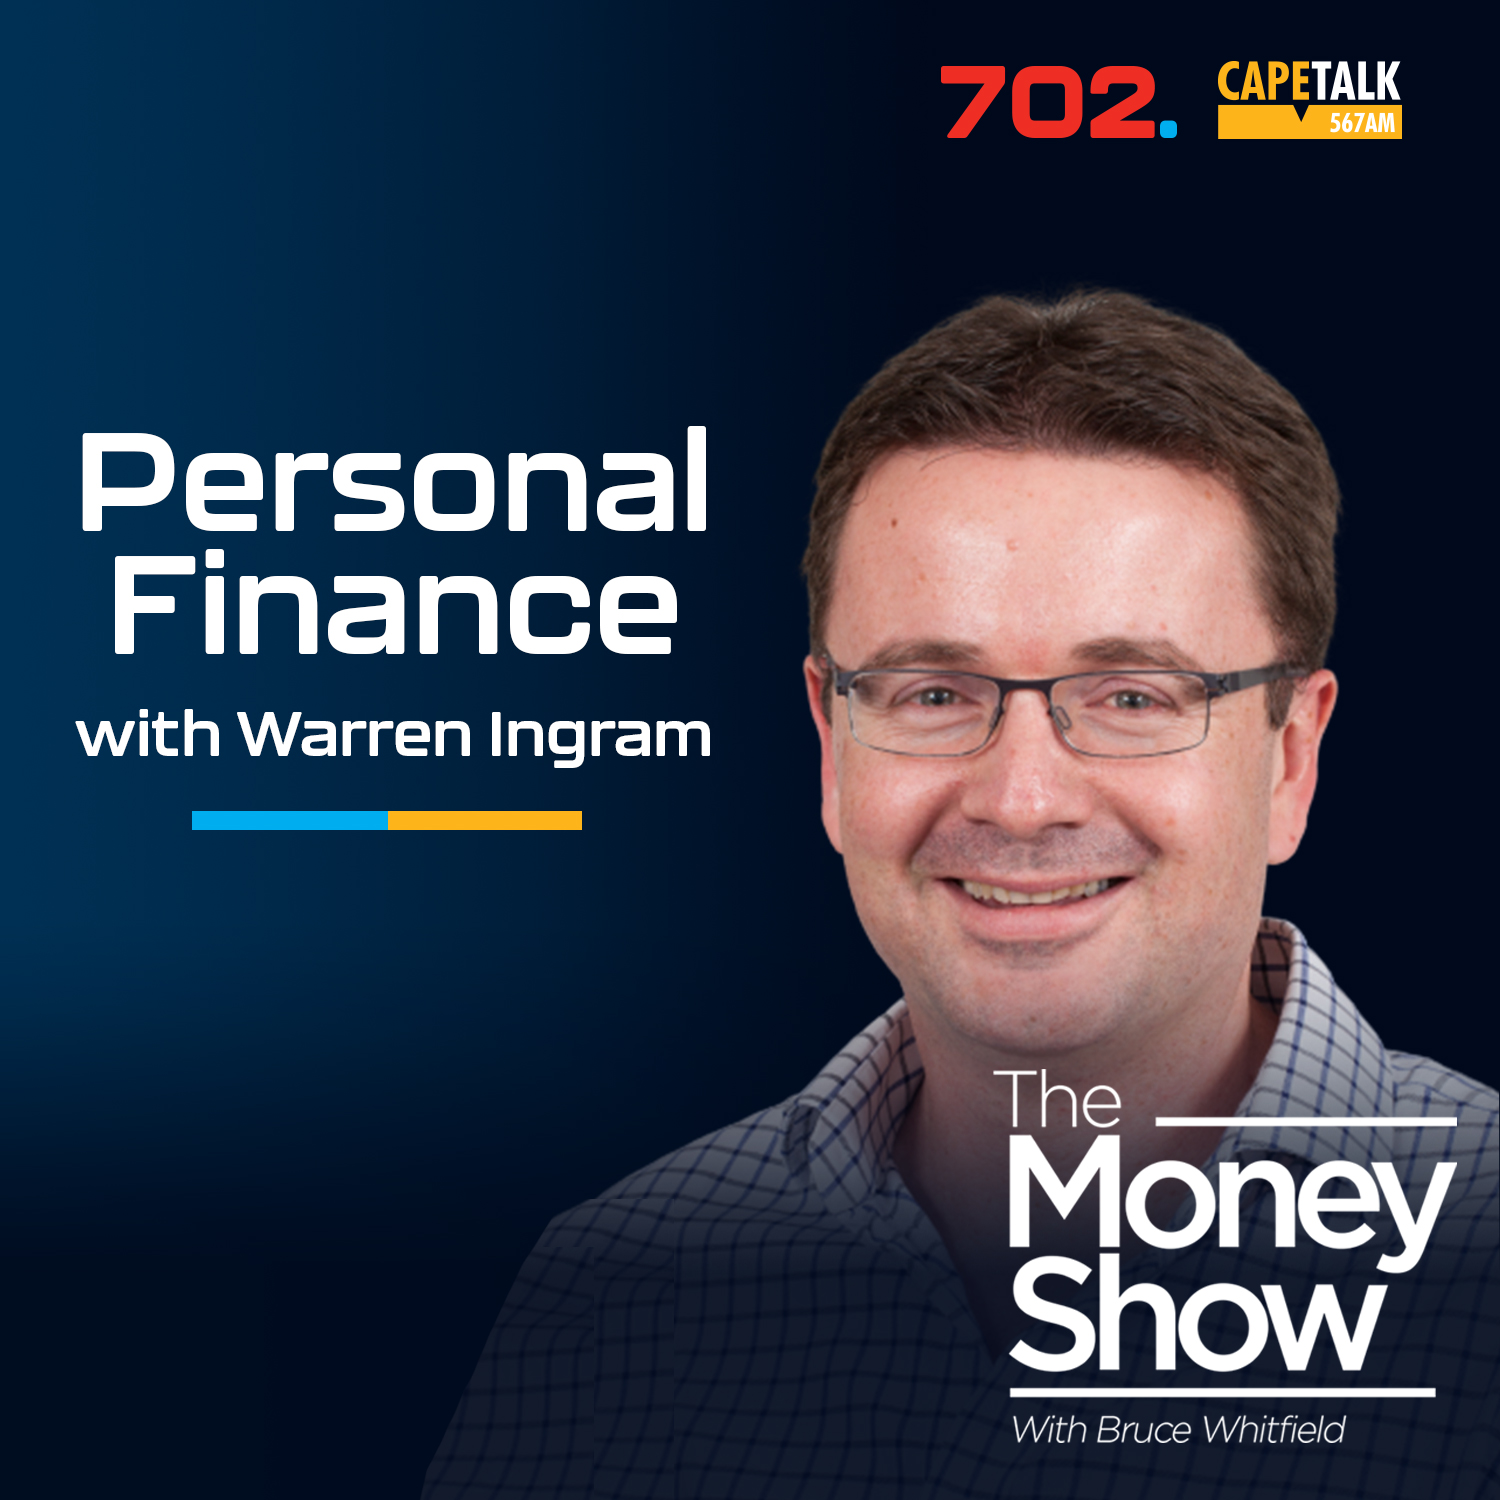 Personal Finance - Is a balanced portfolio the best investment for most people?